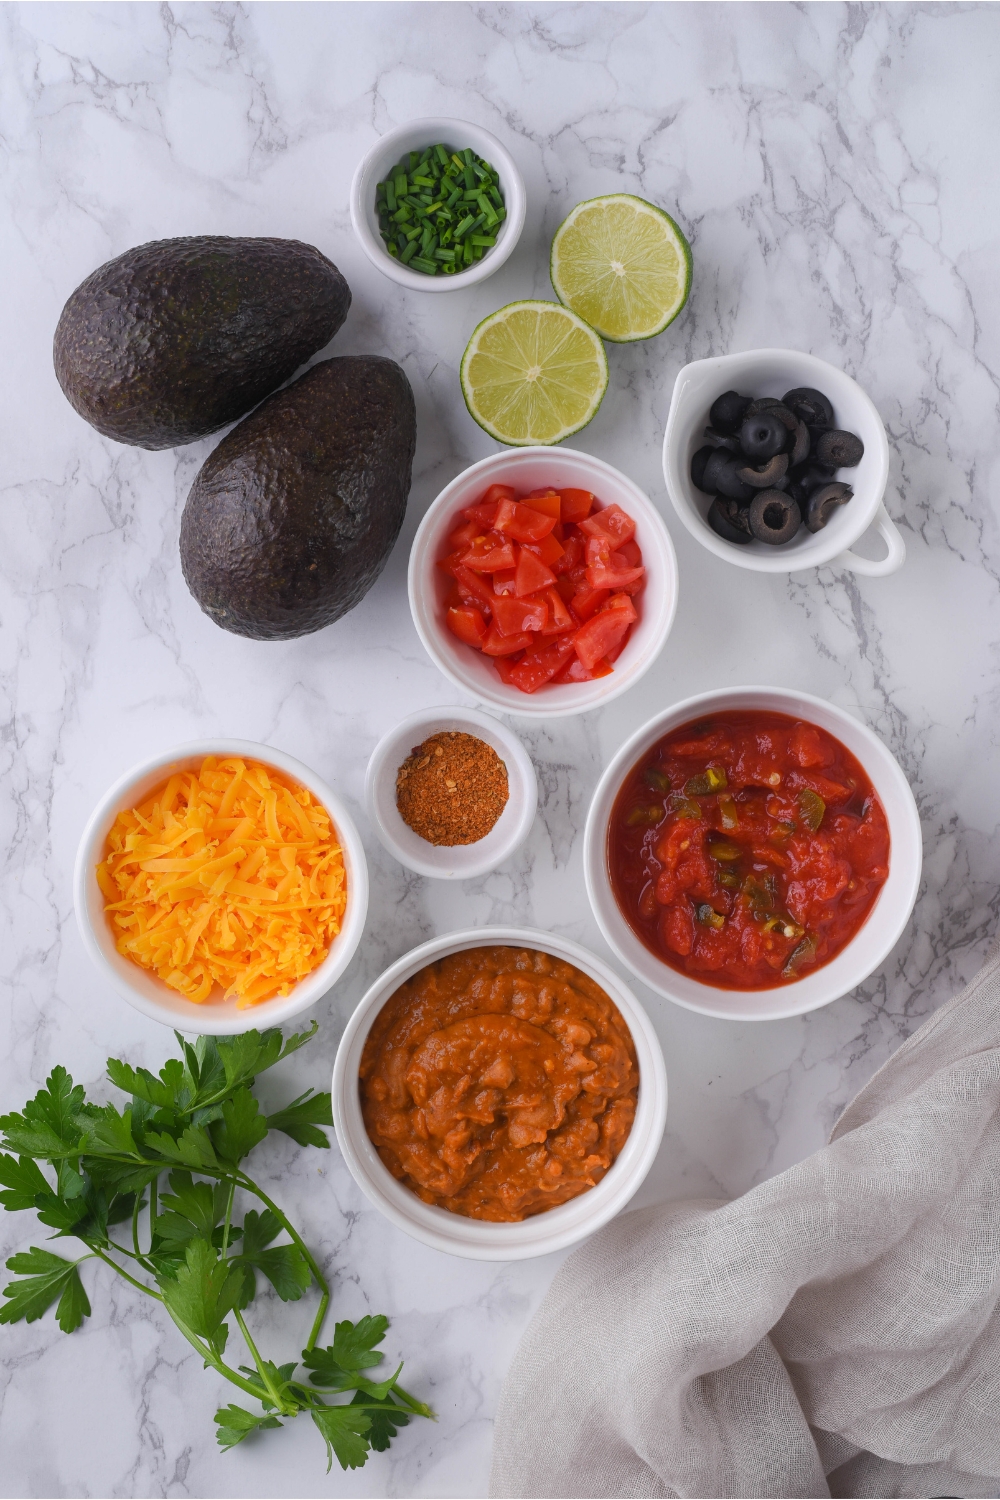 An assortment of ingredients for 7 layer dip including bowls of salsa, shredded cheese, beans, black olives, spices, diced tomatoes, and two avocados.